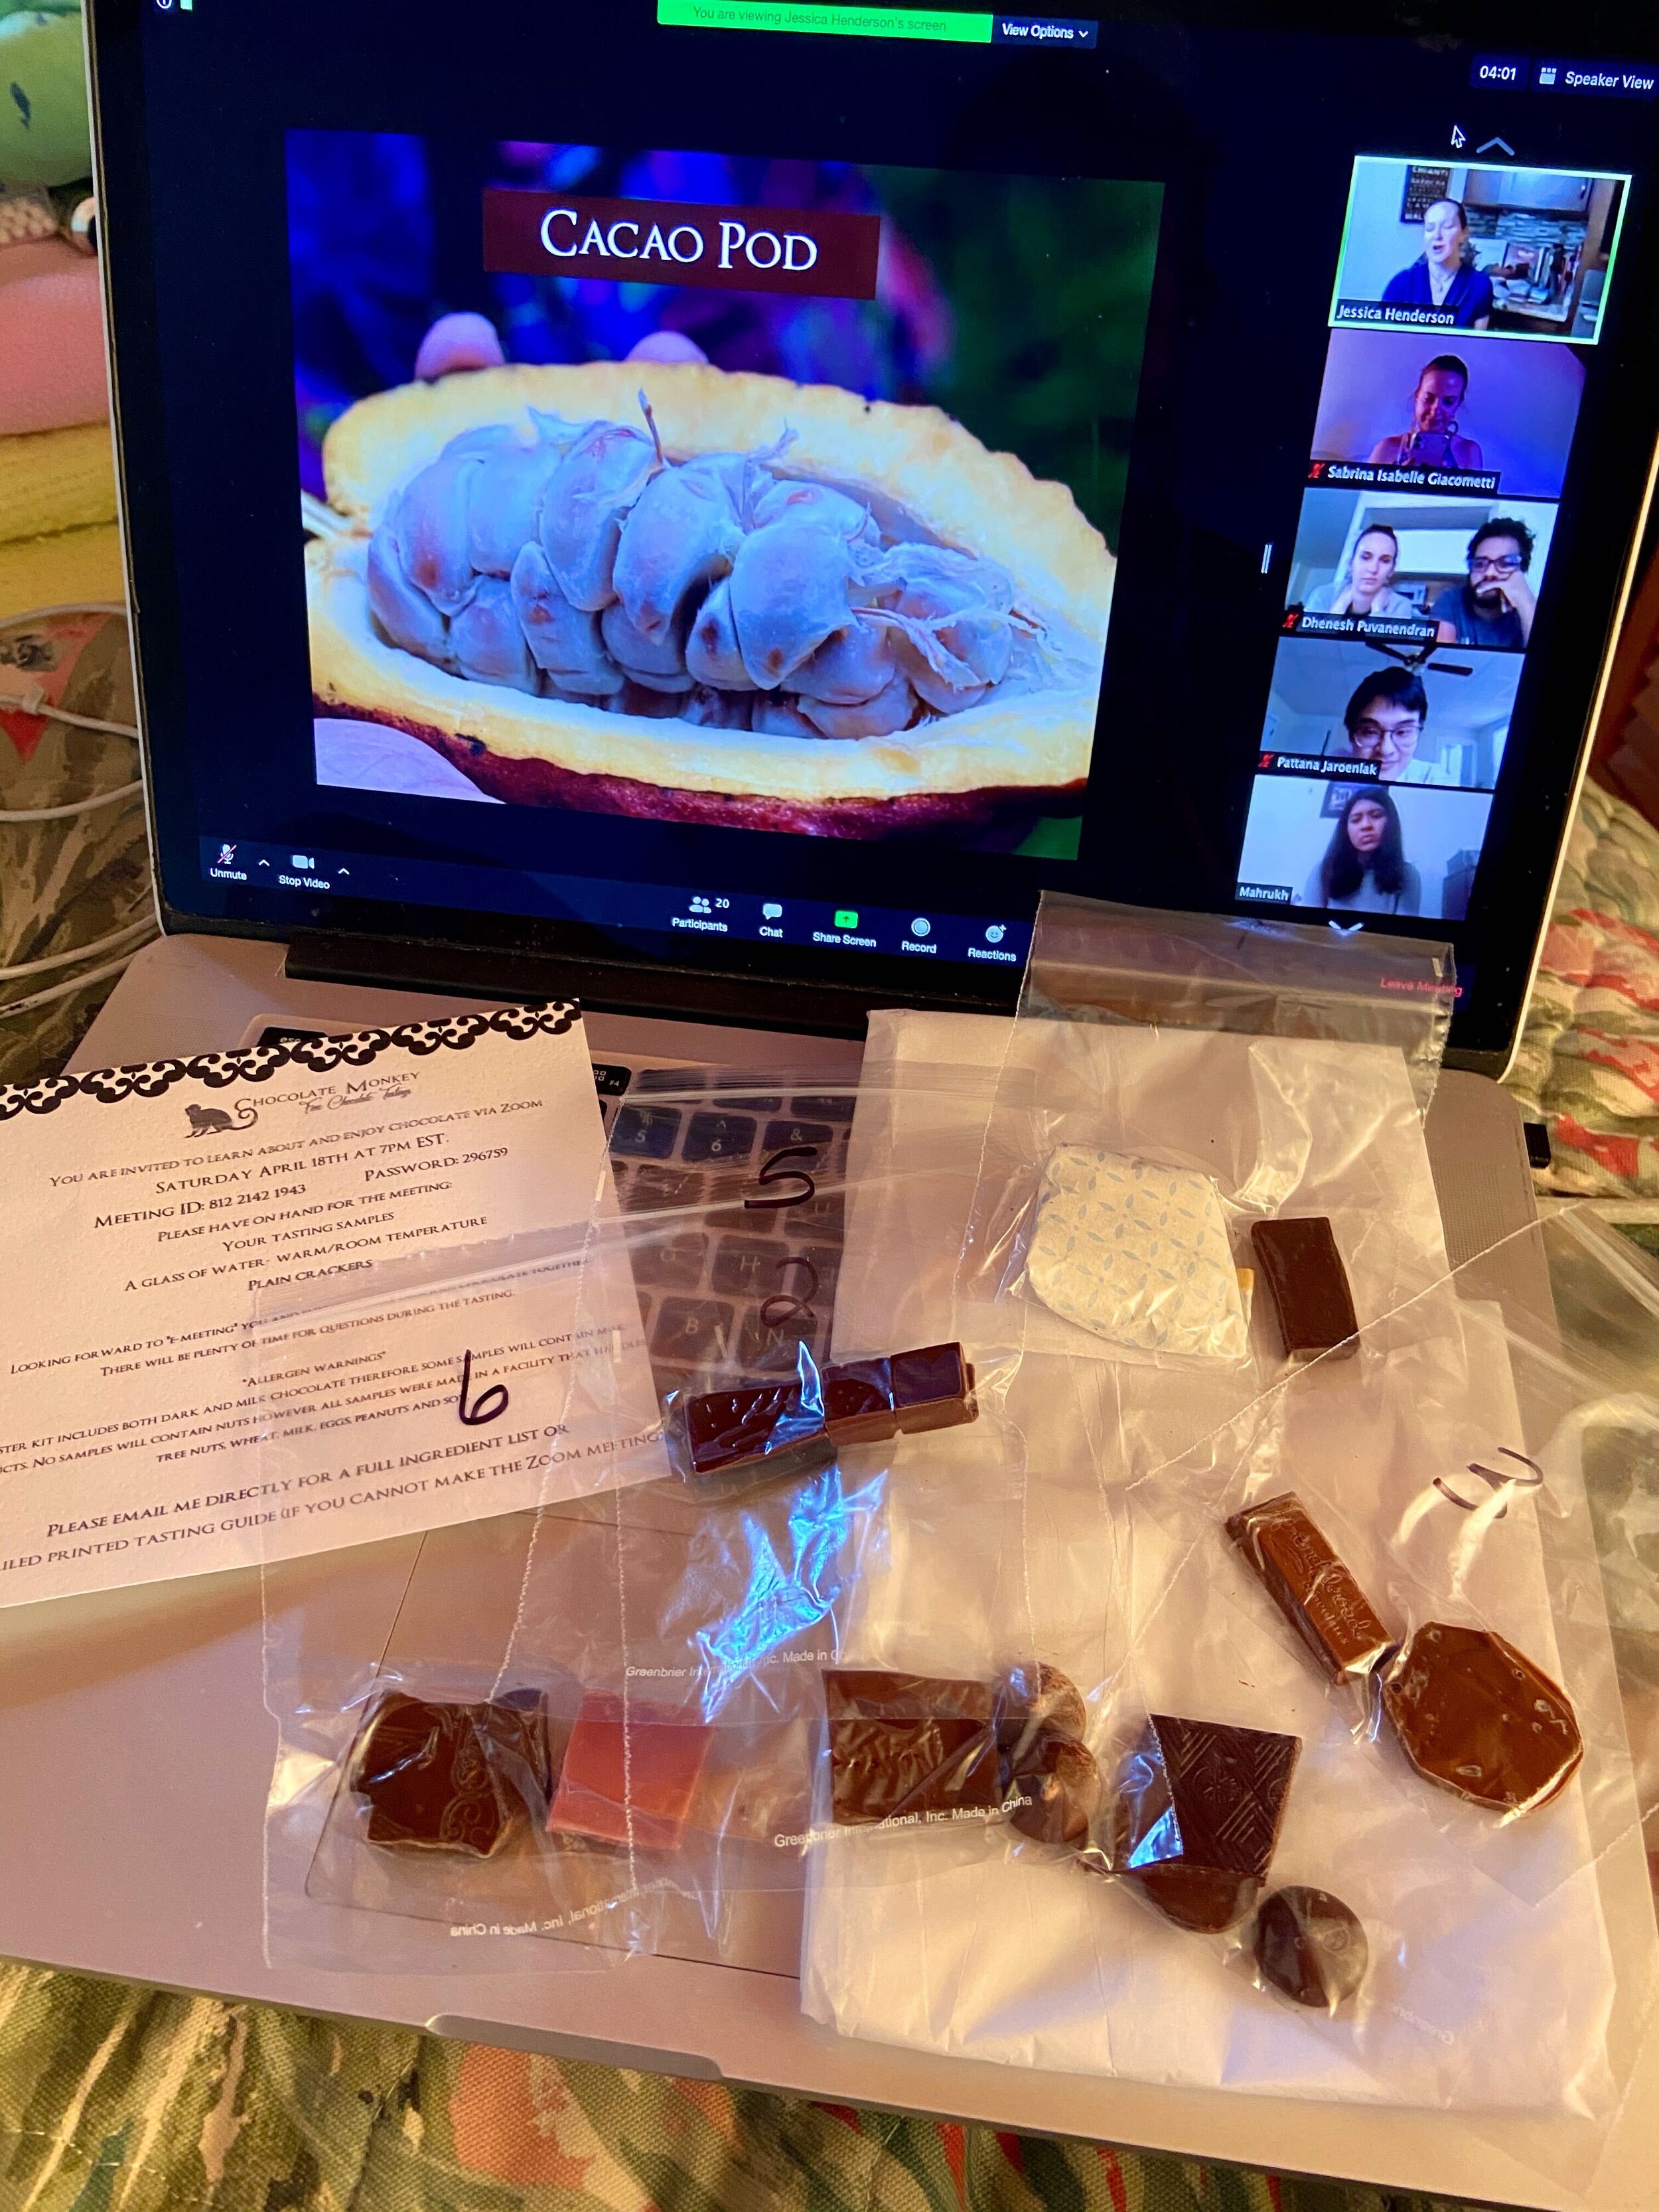 Virtual chocolate tasting during COVID situation